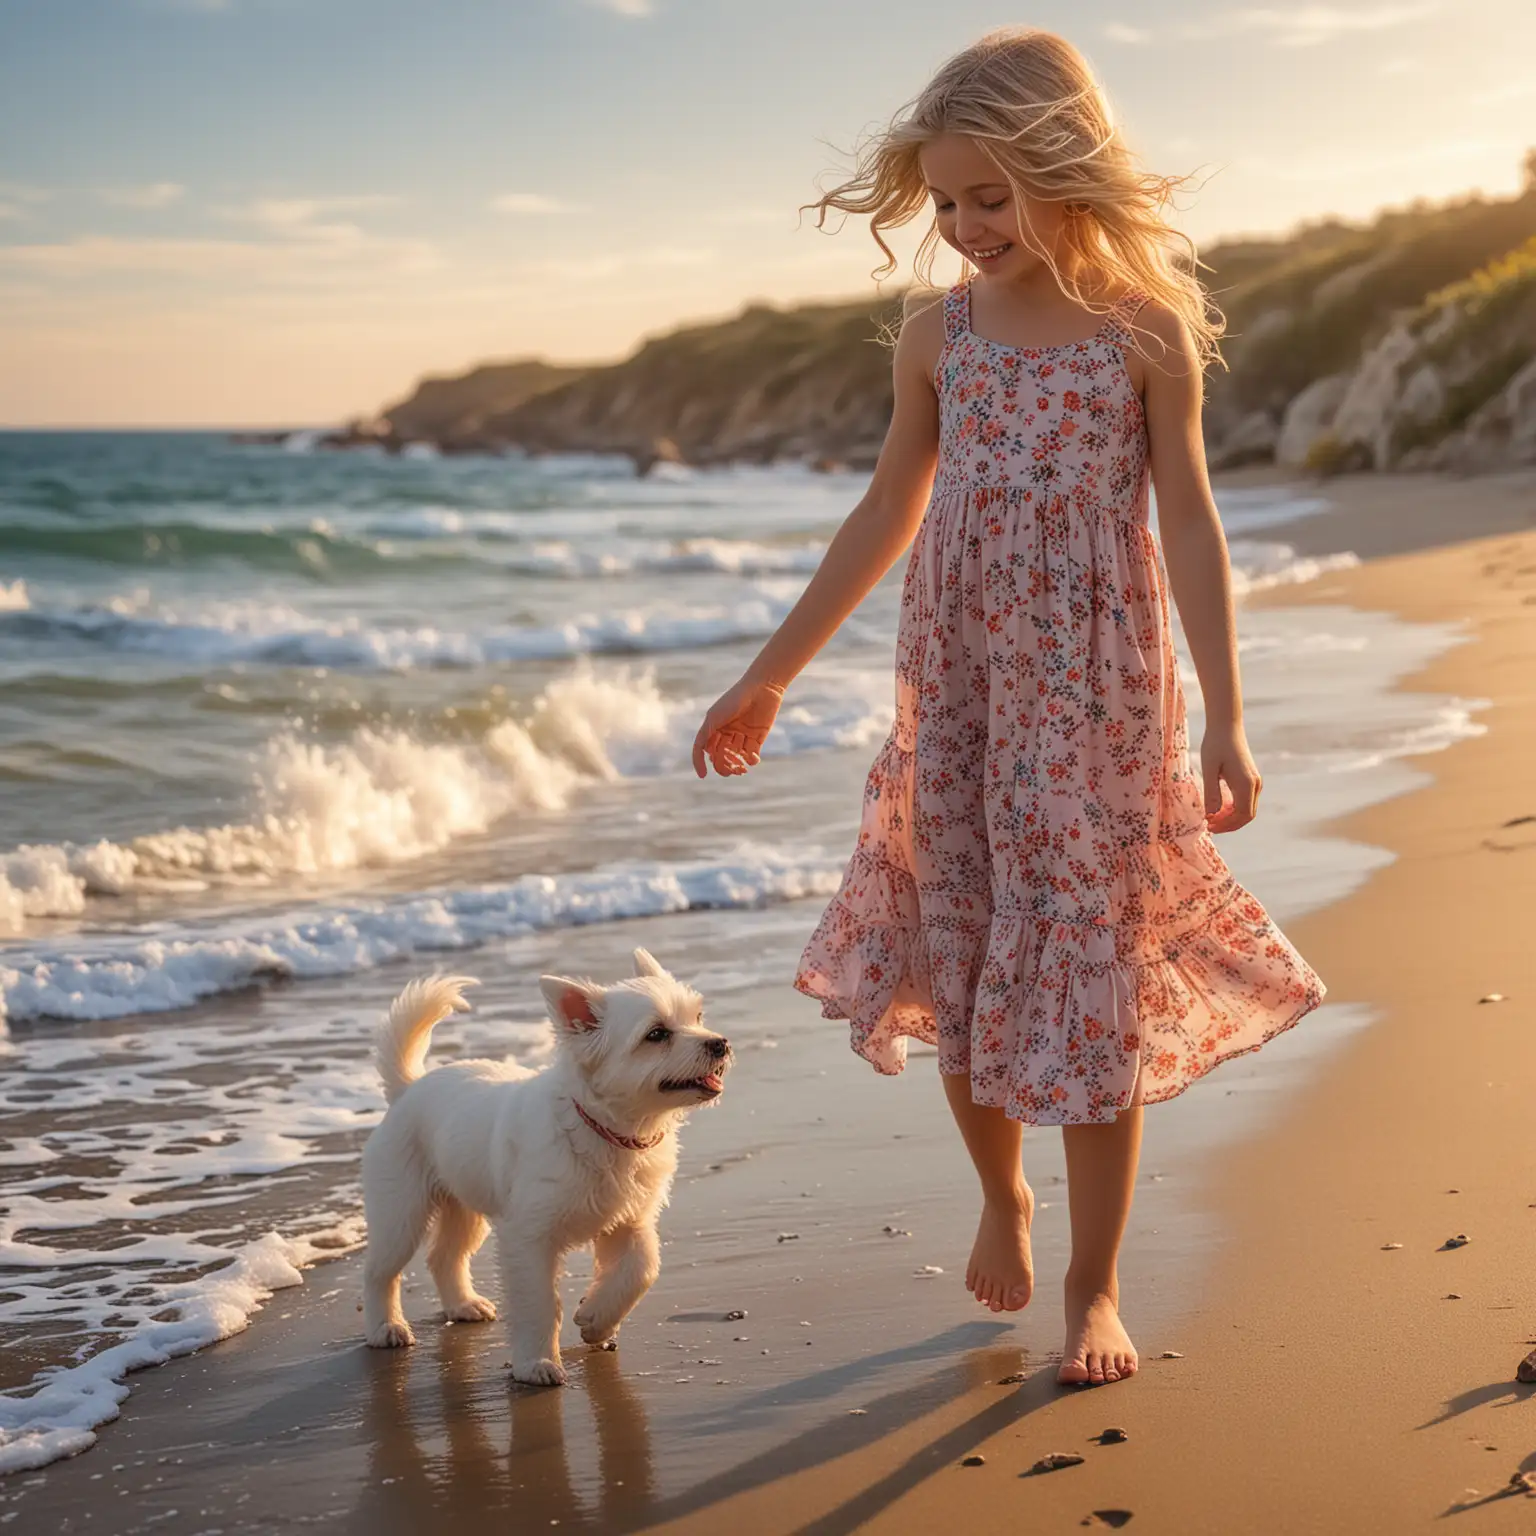 A blond teen girl wearing a floral dress and a pink flower in her hair, stands on a sandy beach with a small, white puppy at her feet. The girl is smiling and looking down at the puppy. The ocean waves lap at the shore behind her, and the sky is a soft blue with a hint of orange from the setting sun. The girl's dress is flowing in the breeze, creating a sense of movement and joy. The image captures a moment of pure innocence and happiness. Photo-realistic, intricate, elaborate, highly detailed, award-winning photo, outdoor photography, 8K, UHD, HDR.